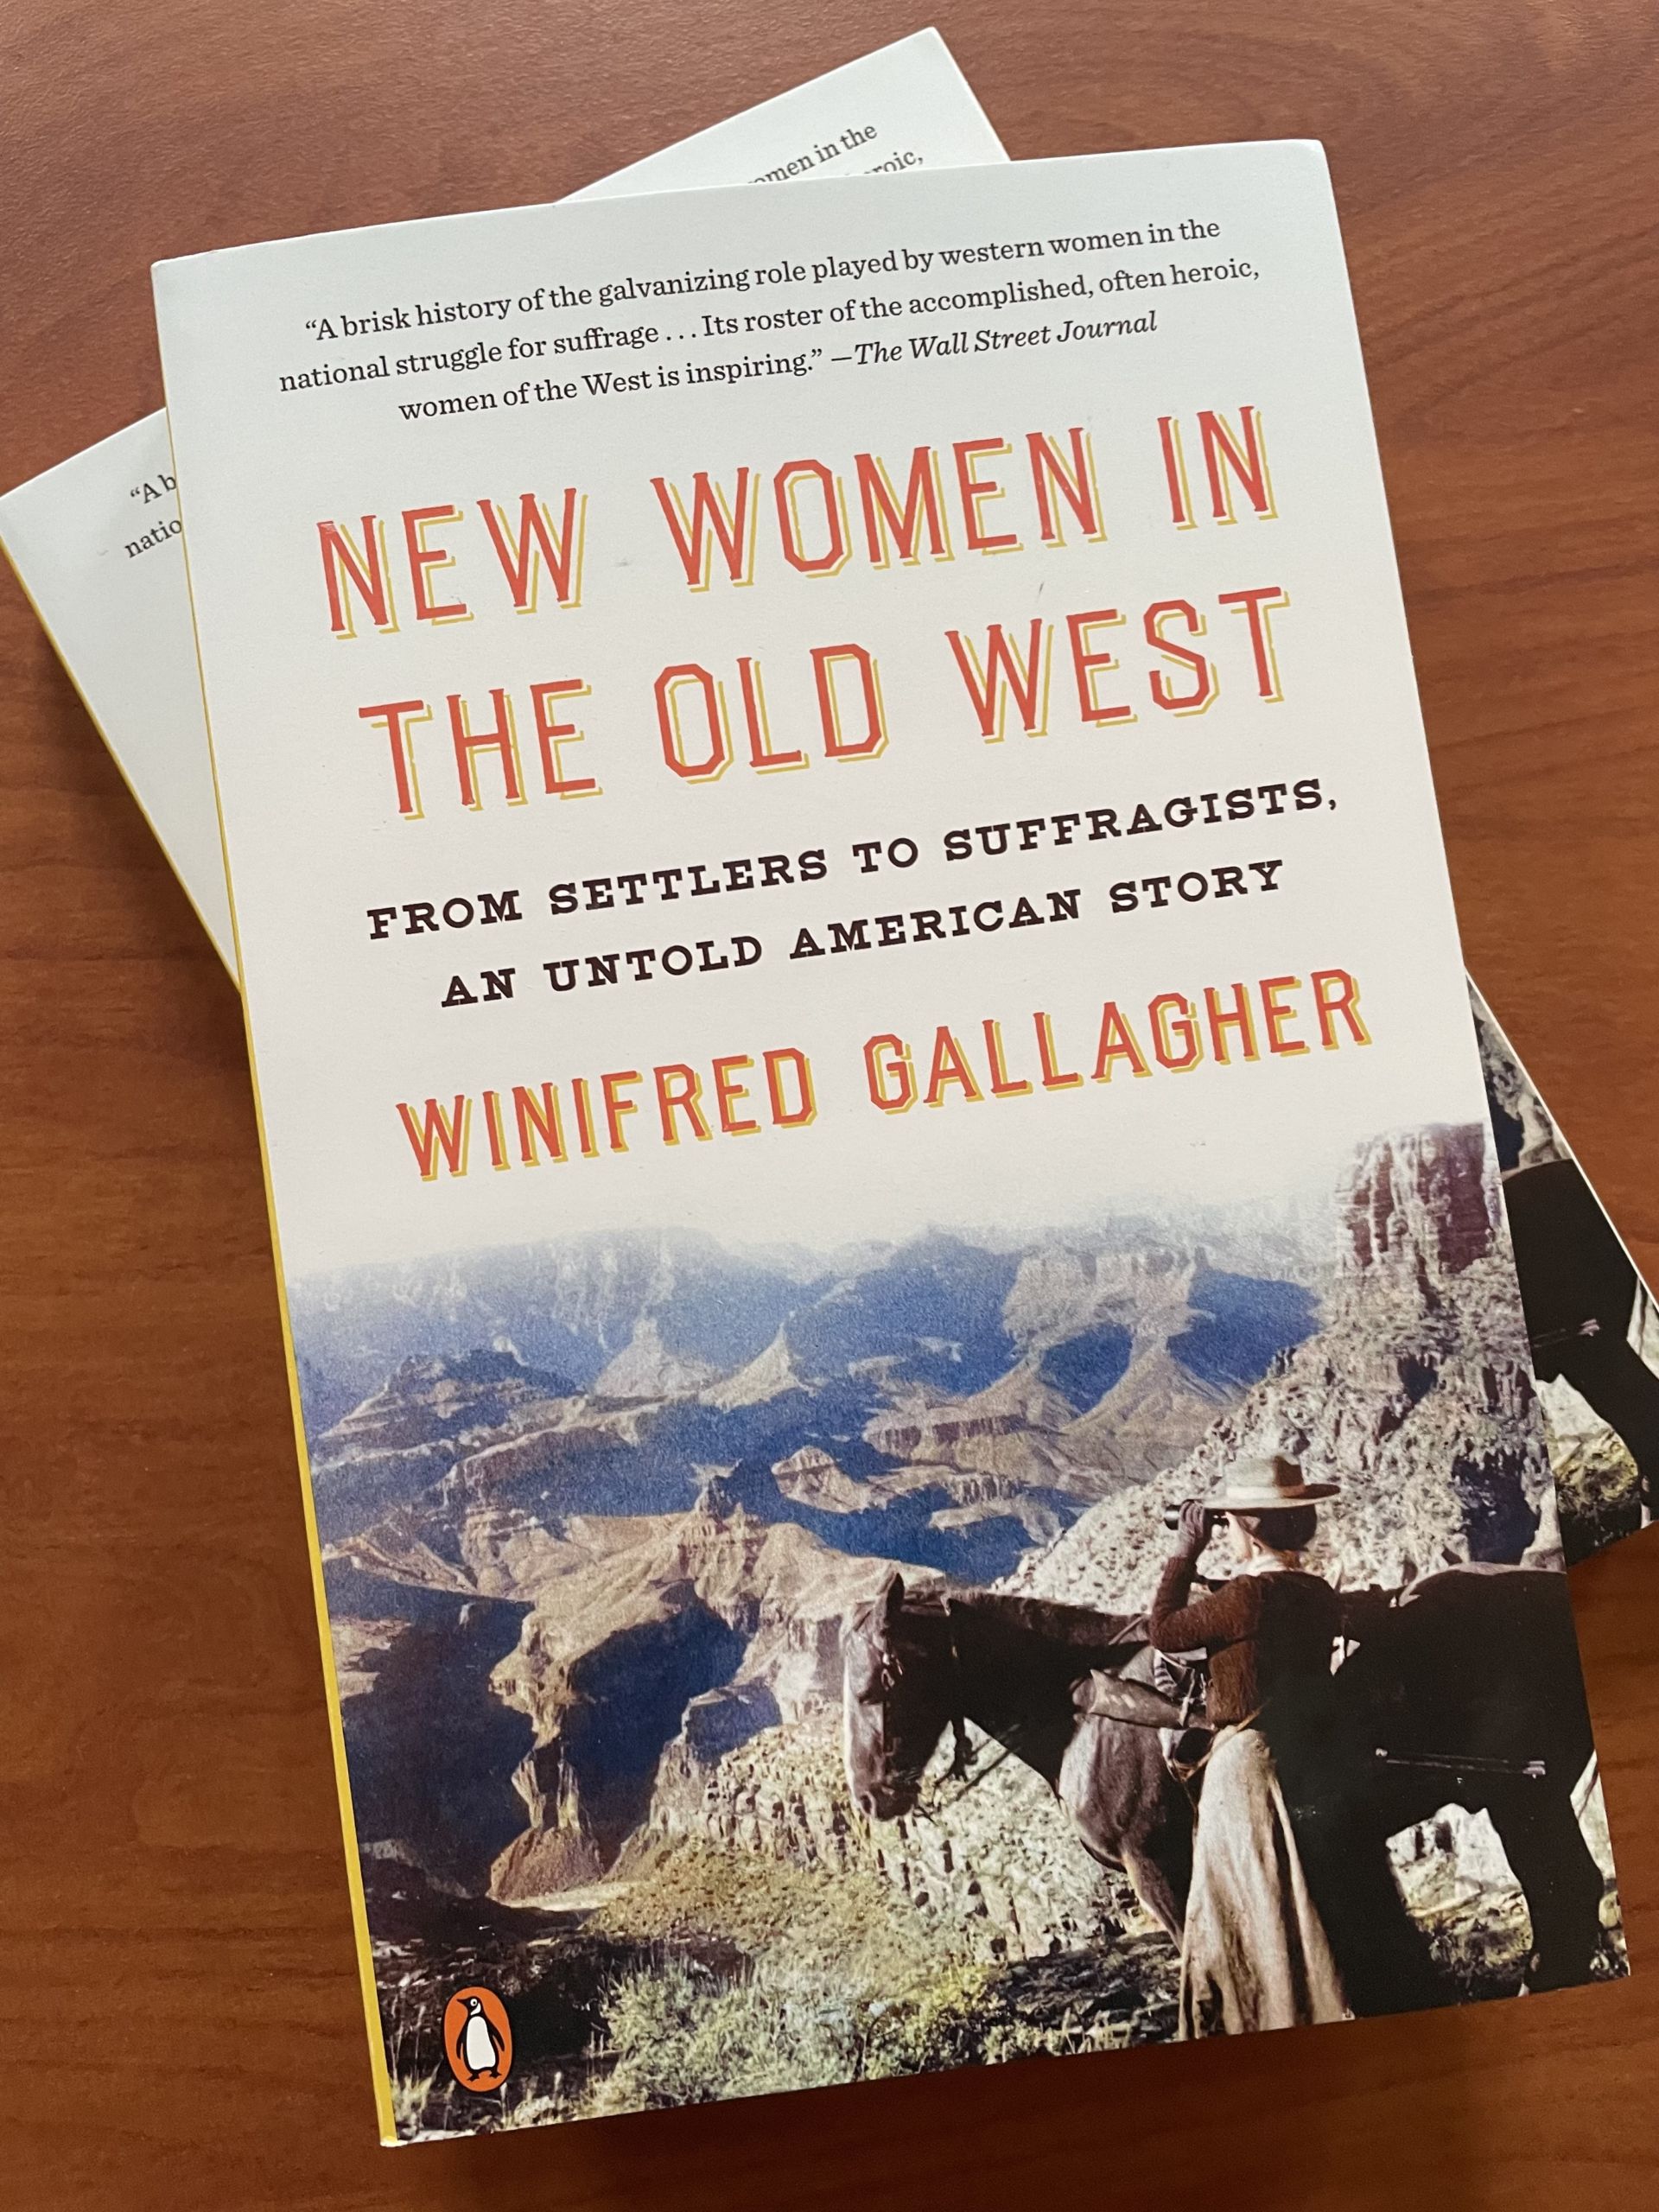 cover of book "New Women in the Old West"